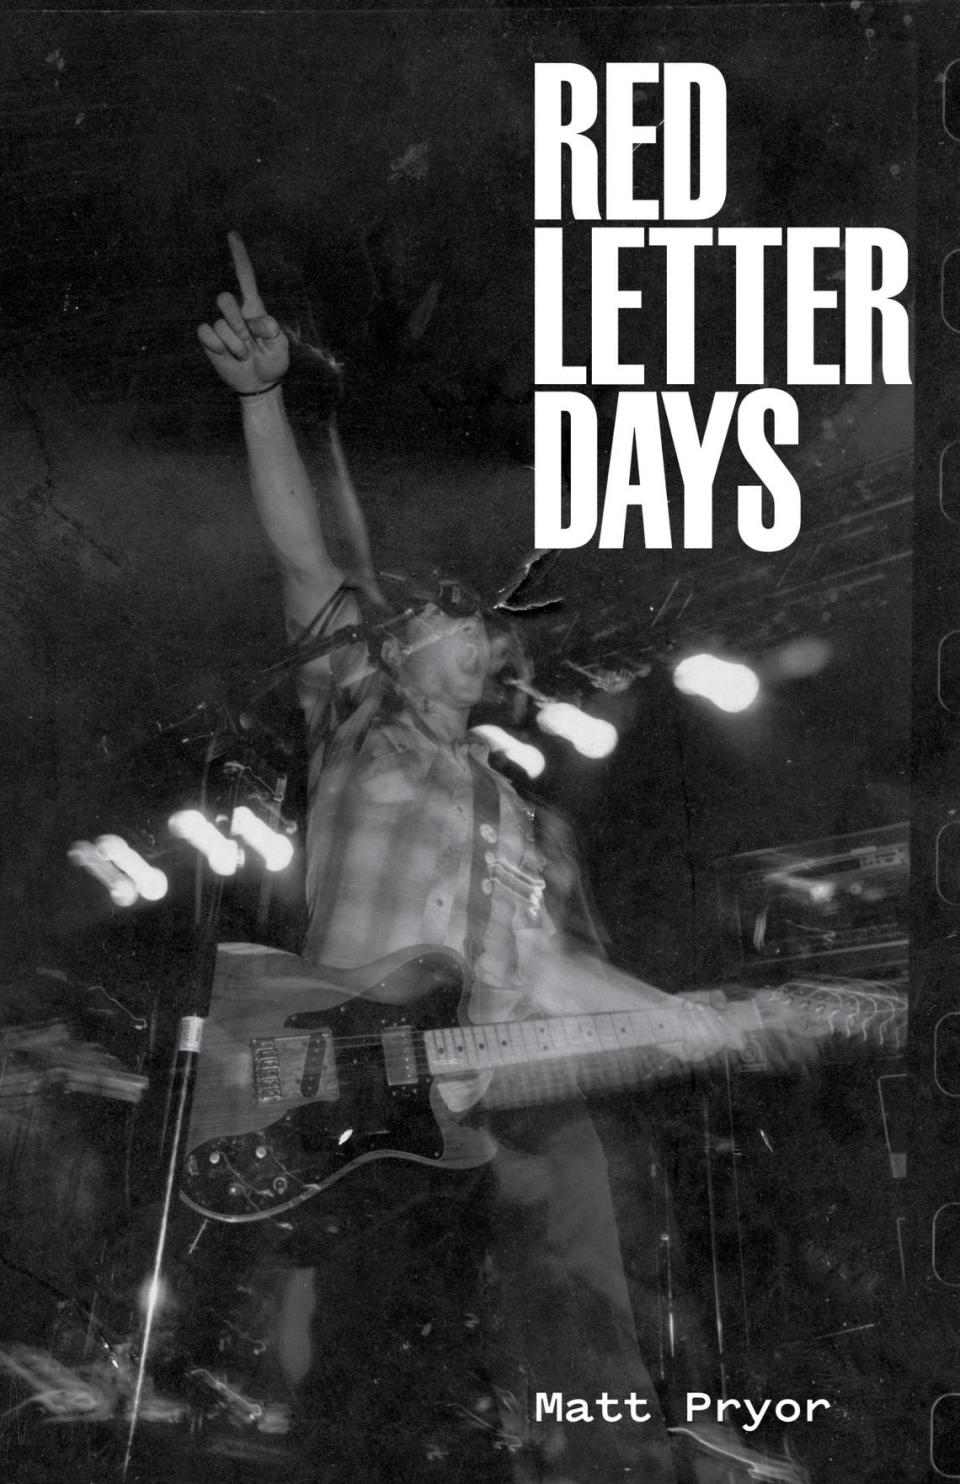 Matt Pryor’s autobiography, “Red Letter Days,” is due out on Jan. 23.